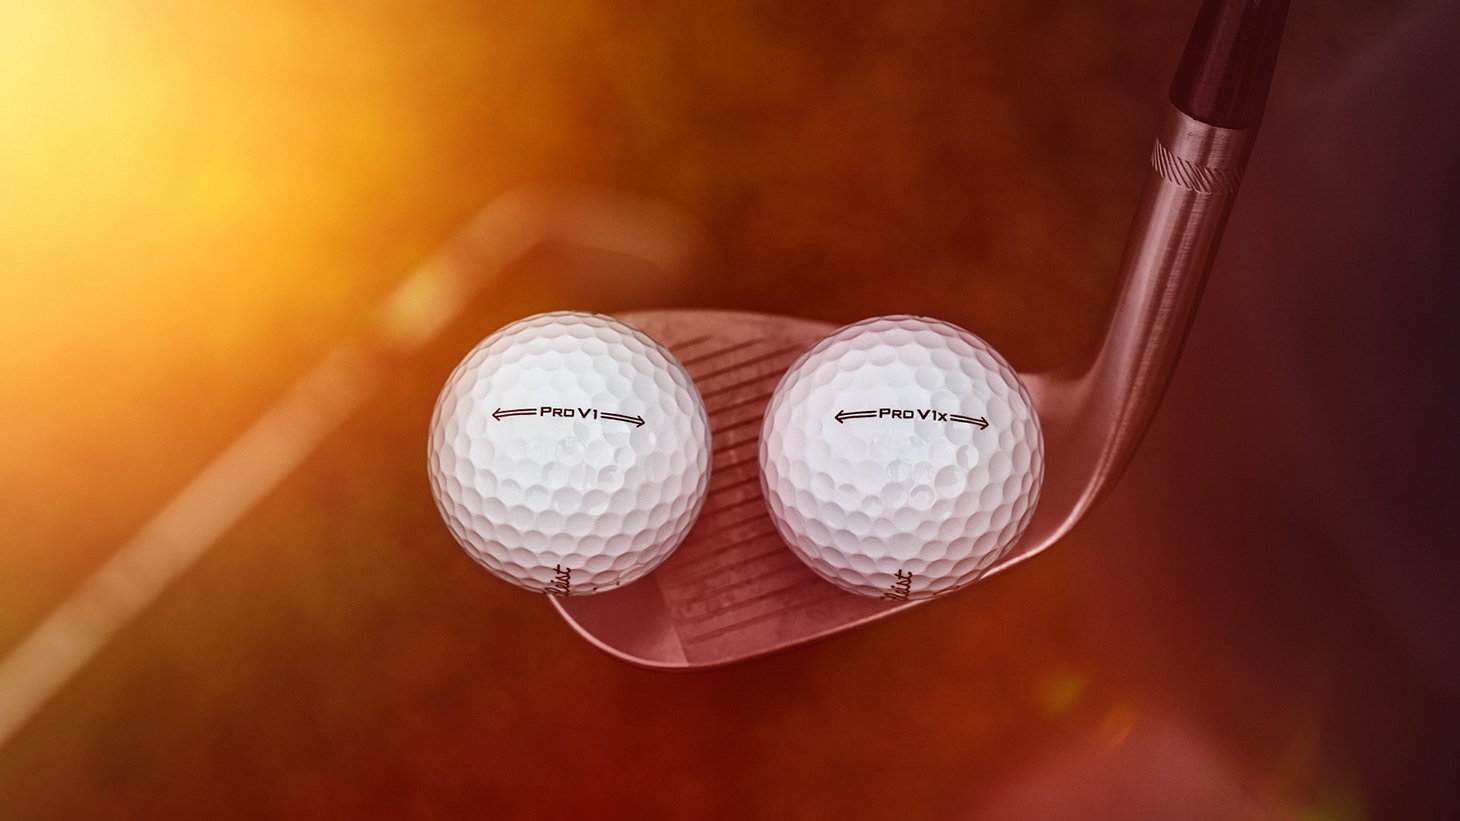 The softer urethane cover on both the new Pro V1 and Pro V1x golf balls delivers more spin for even greater greenside control